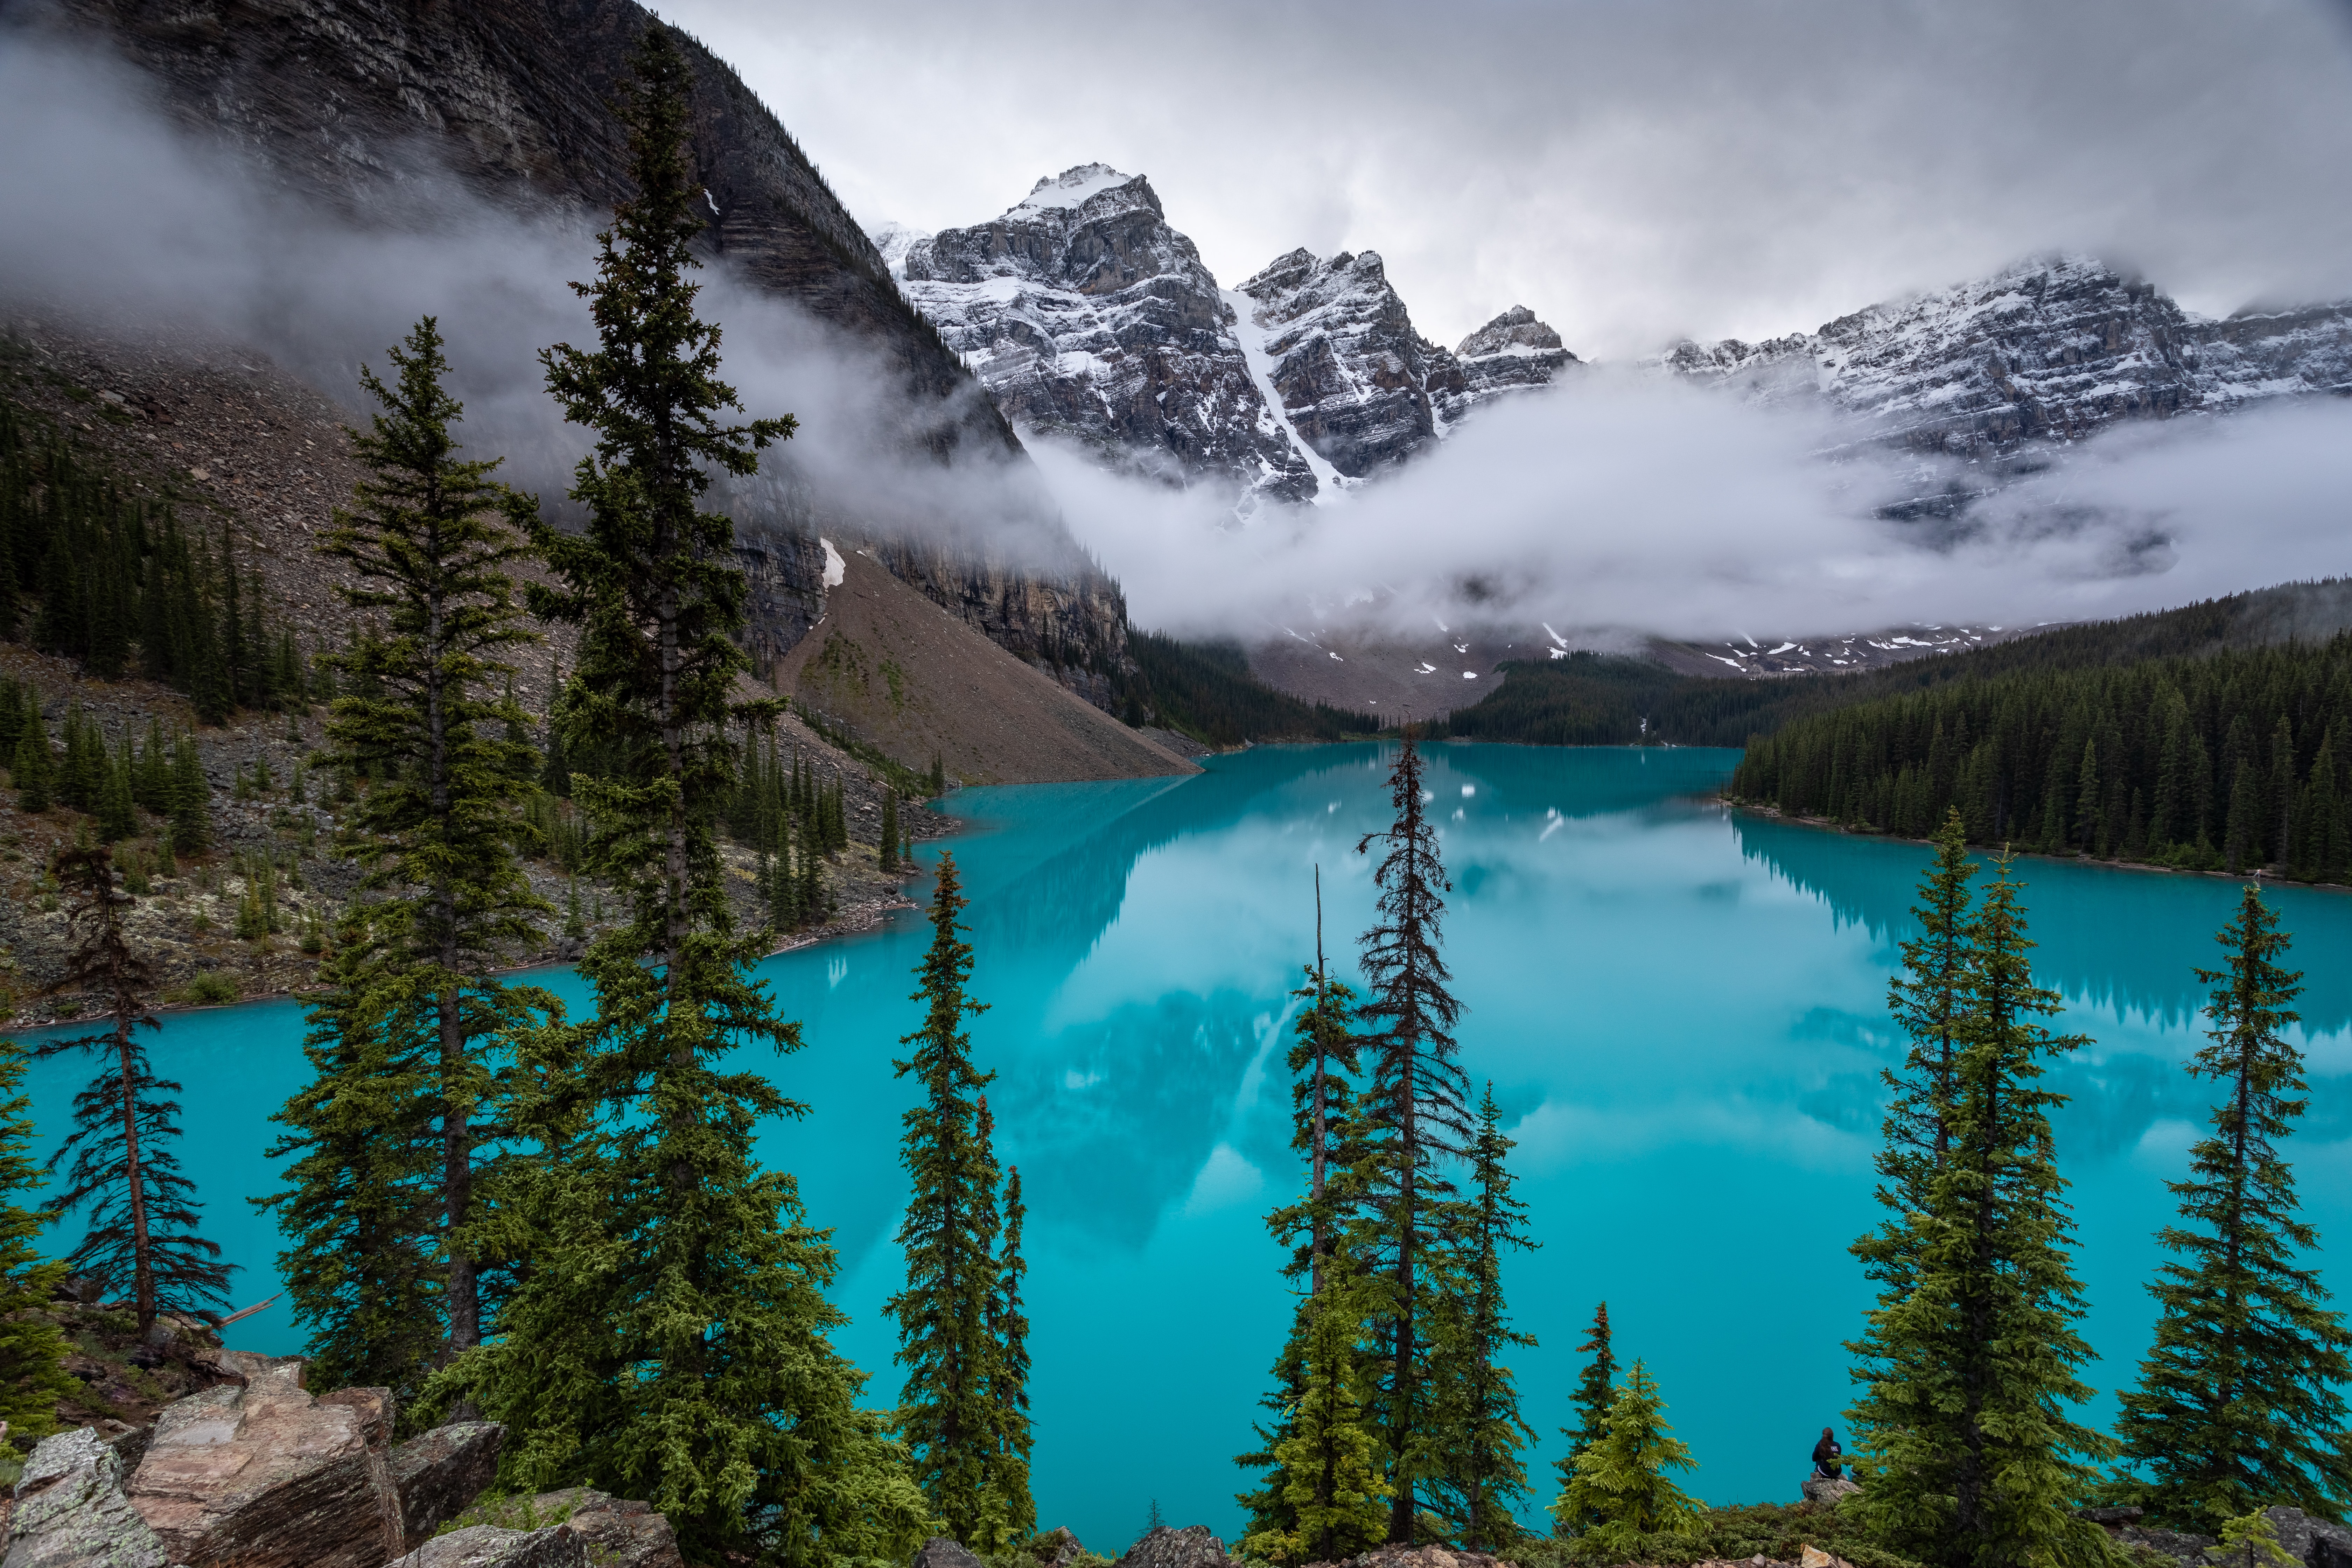 General 6720x4480 landscape lake mountains water forest Moraine Lake Banff National Park Canada